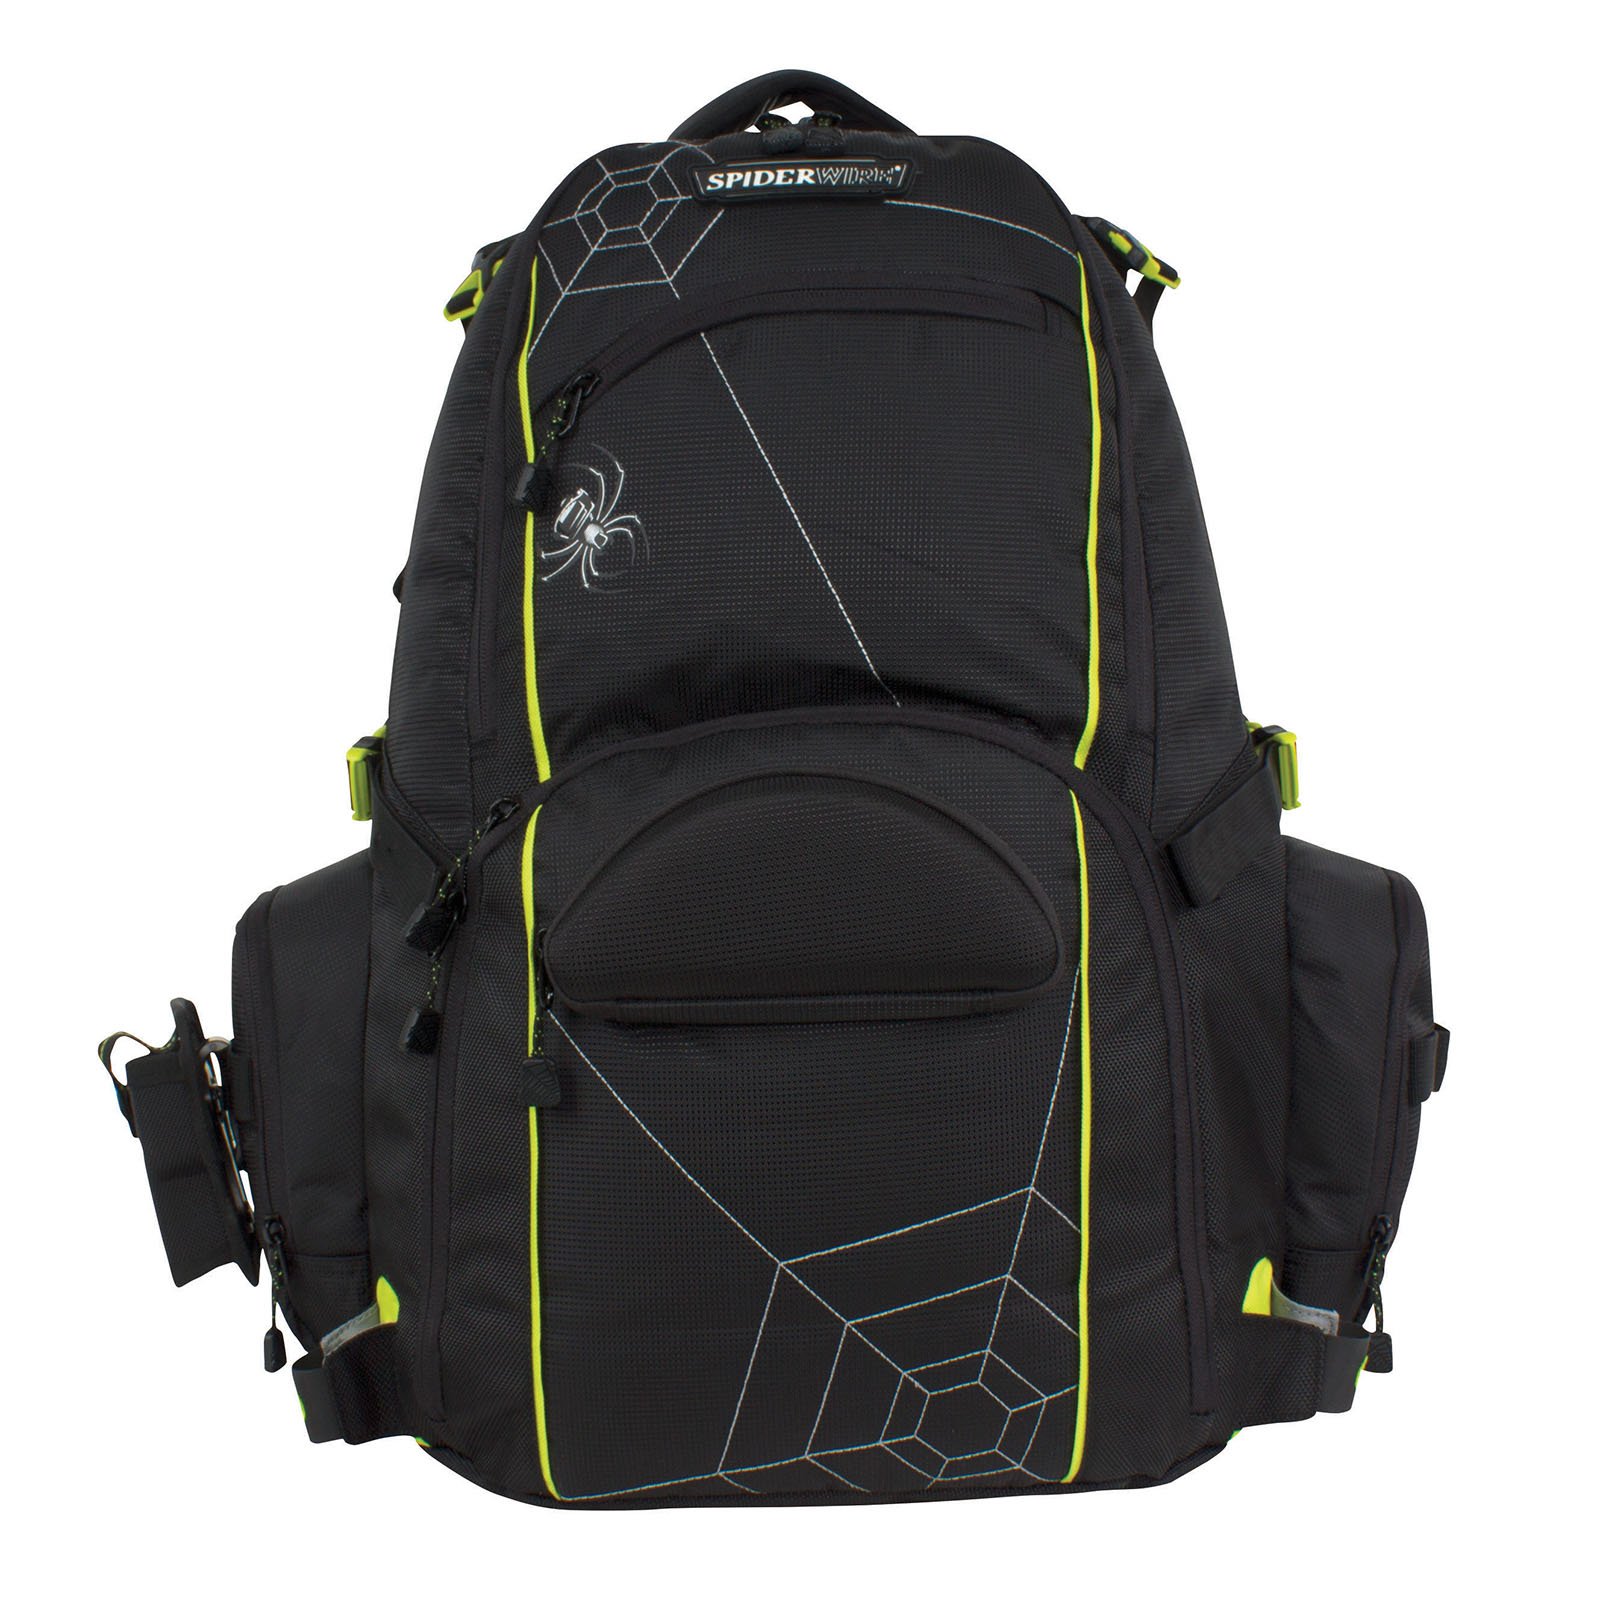 Spiderwire Fishing Tackle Backpack with 3 Medium Utility Boxes SPB006 - image 3 of 5